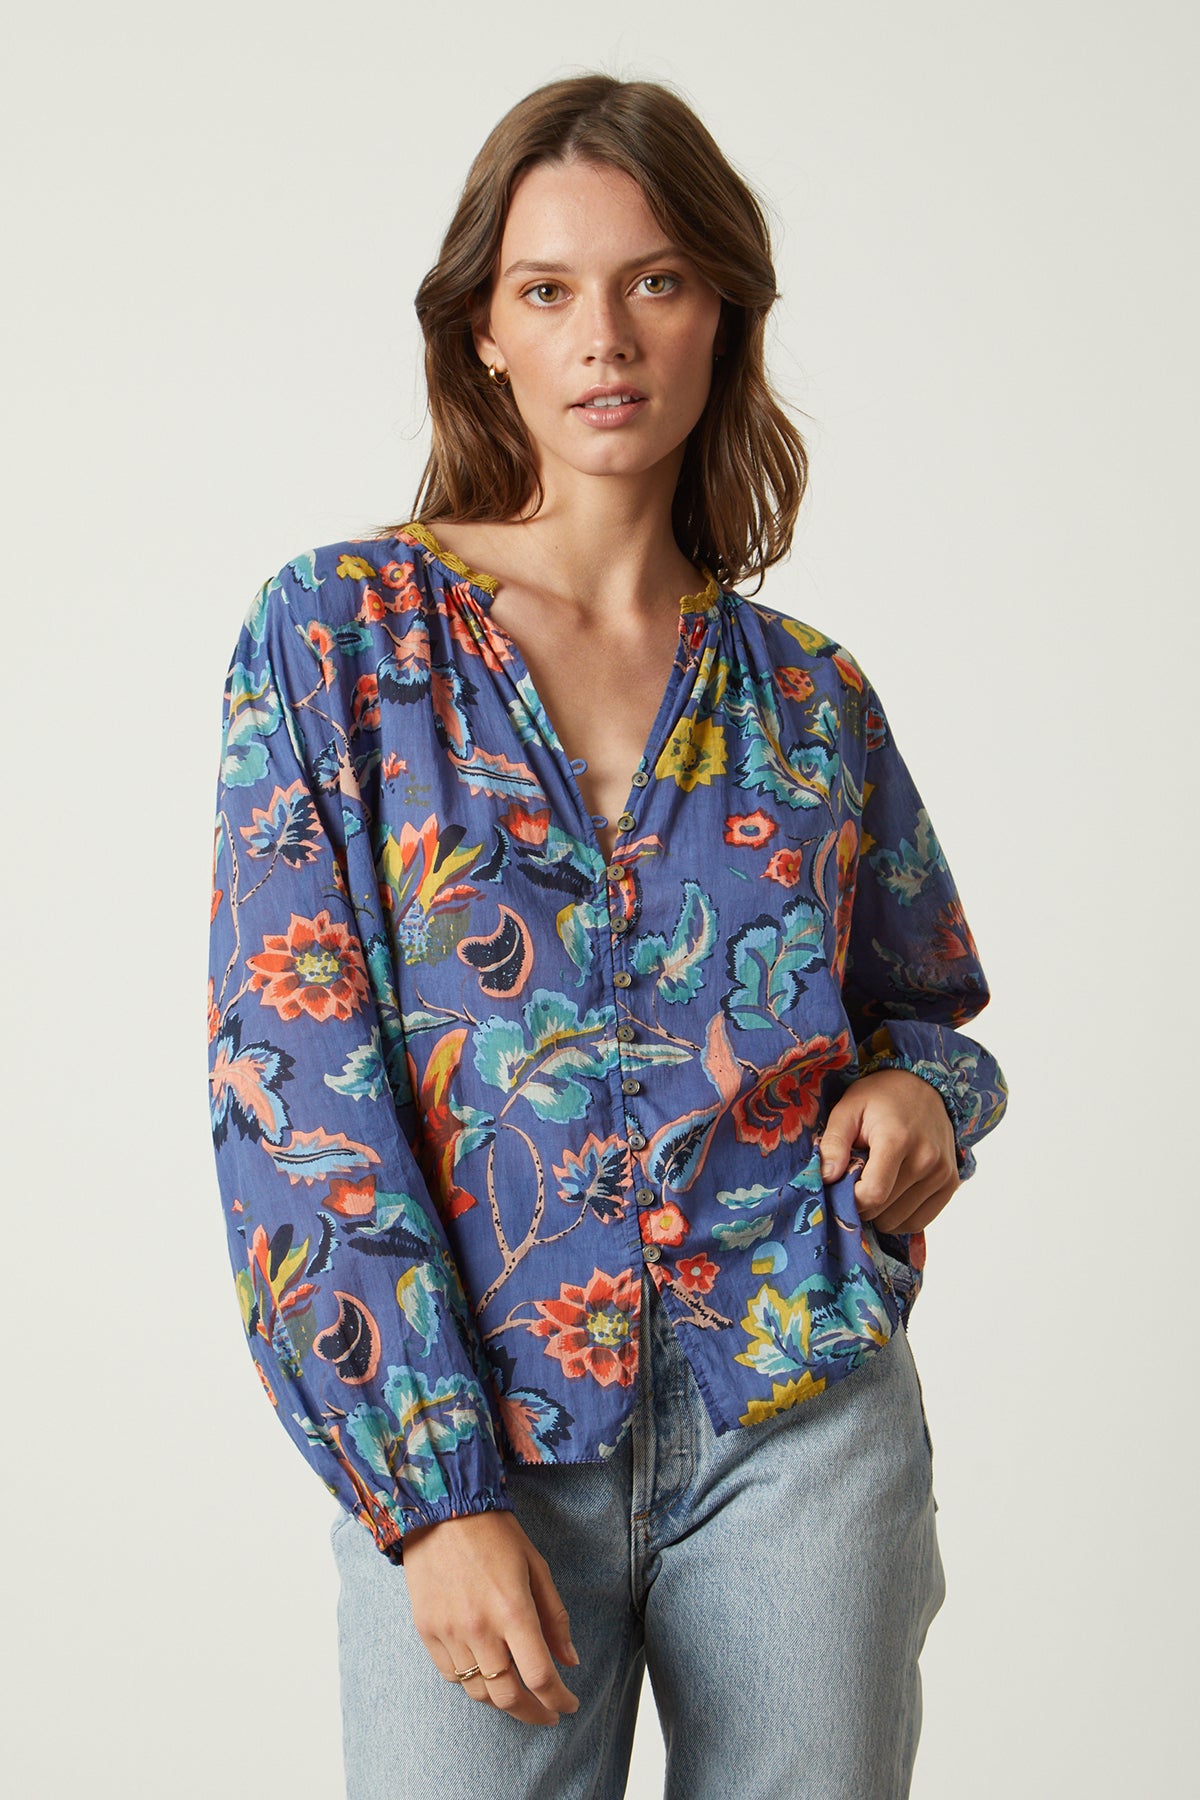 Camryn Top in colorful spring floral print with denim front-26022862880961